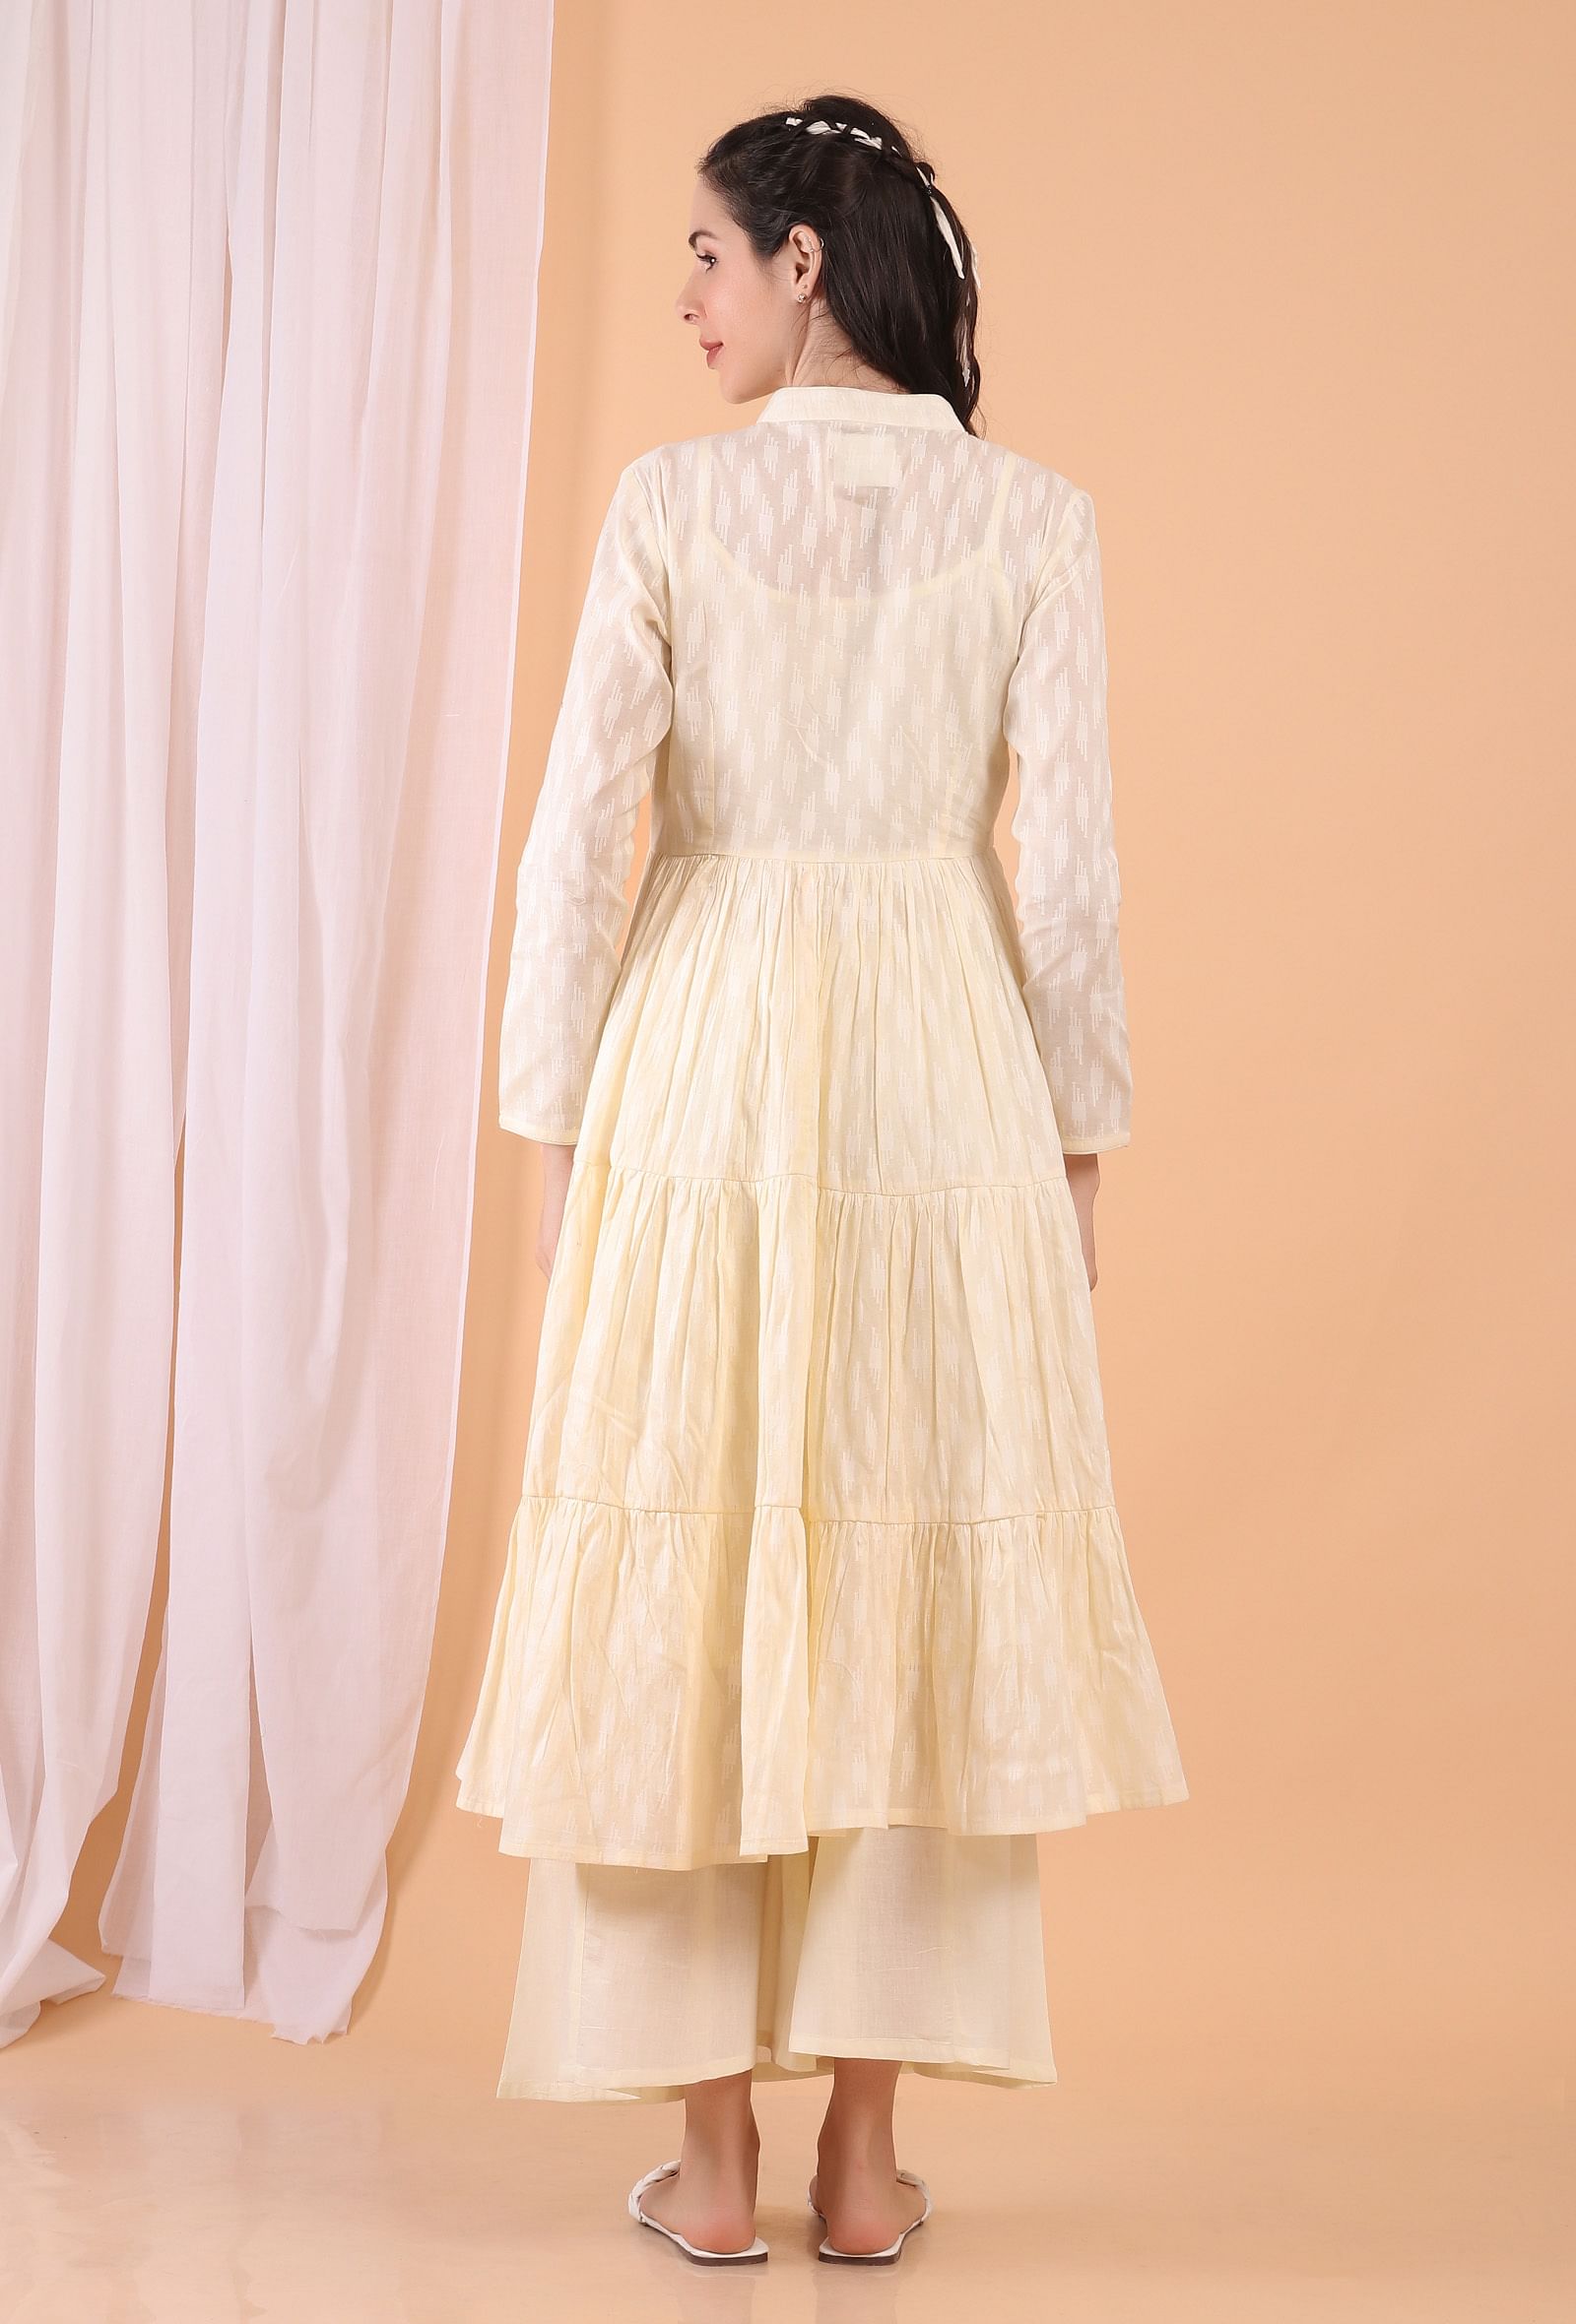 Set of 2: Cream Cotton Tiered Gathered Dress with Pants